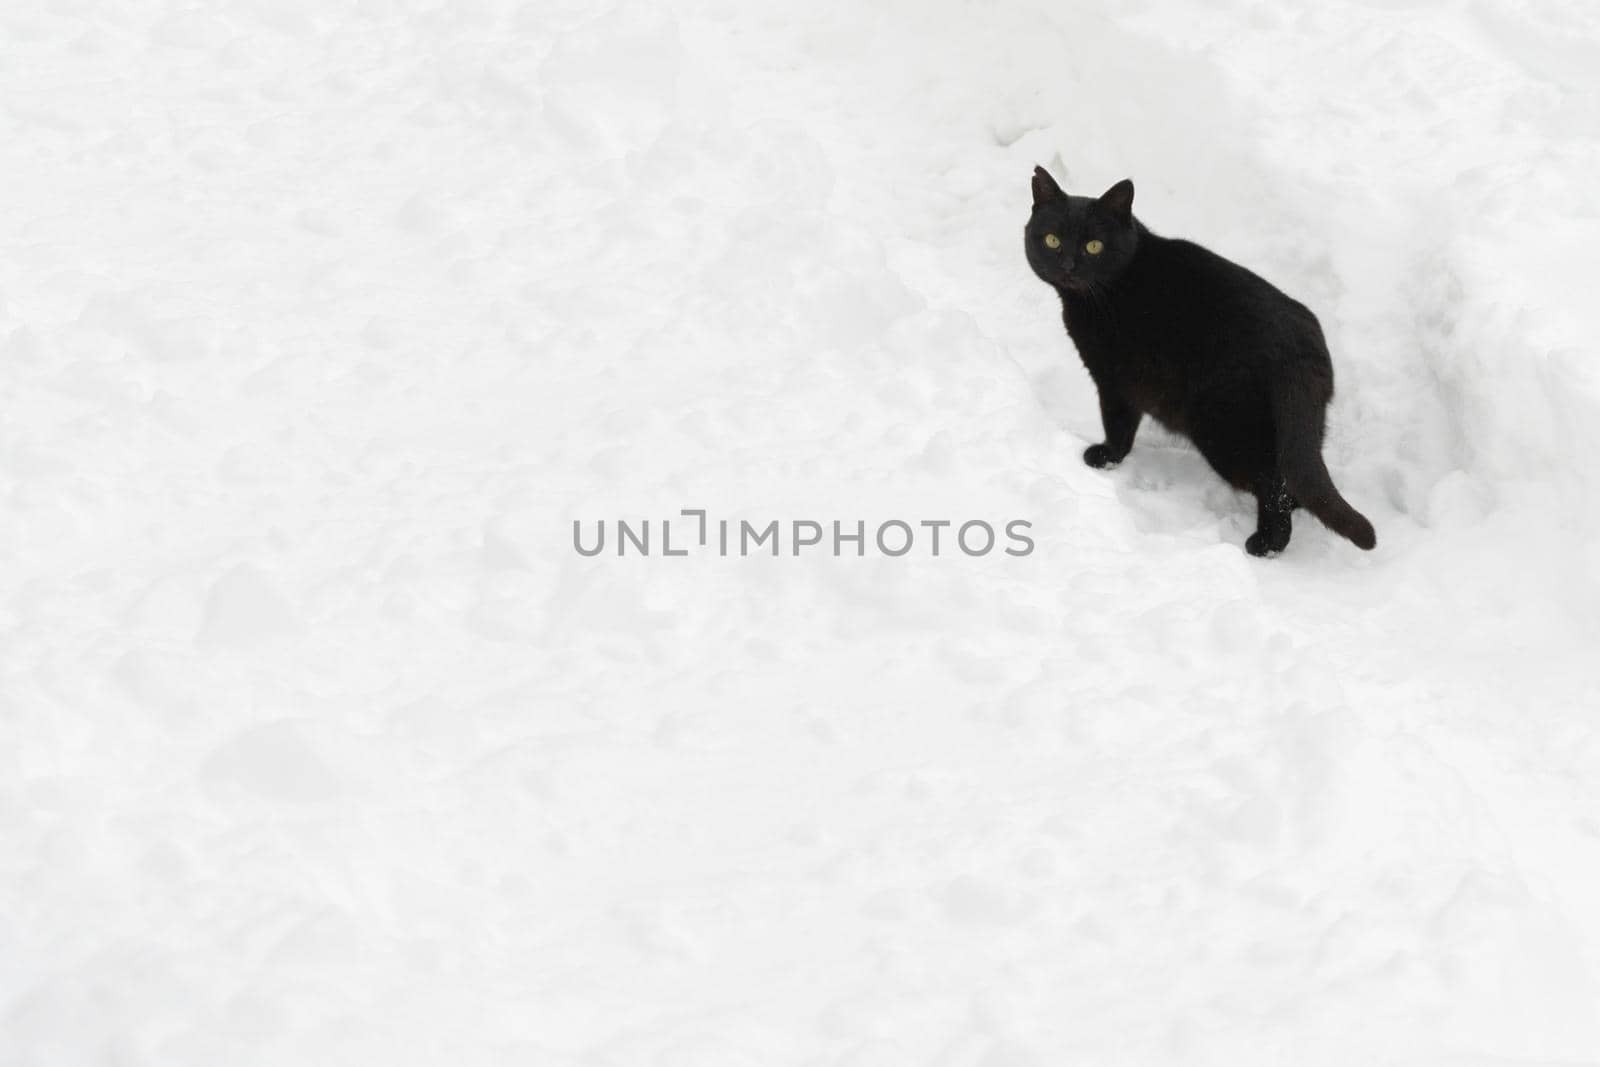 a black cat walks along a snowy path. everything is snow-covered and clean. the cat turns around and looks at the camera